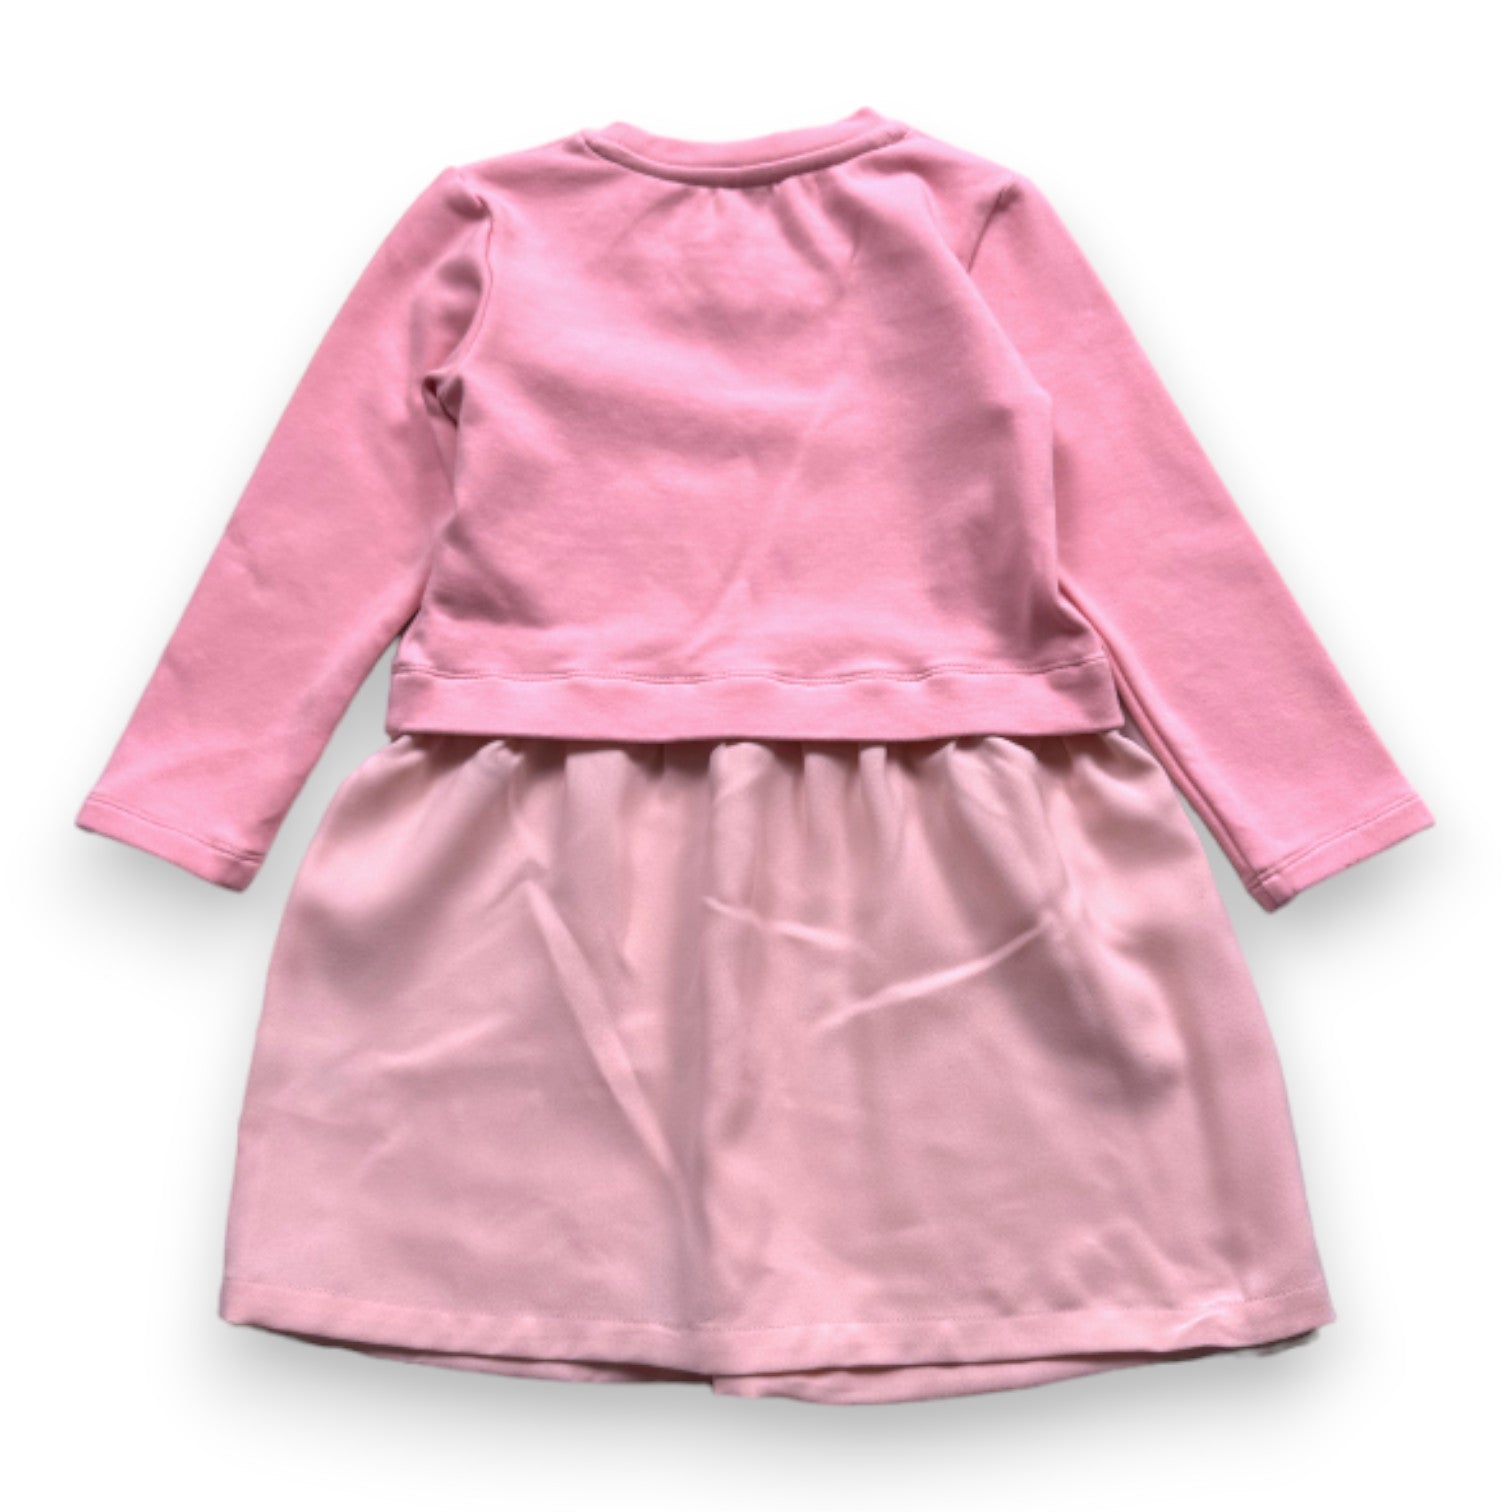 KARL LAGERFELD - Robe rose à manches longues - 3 ans